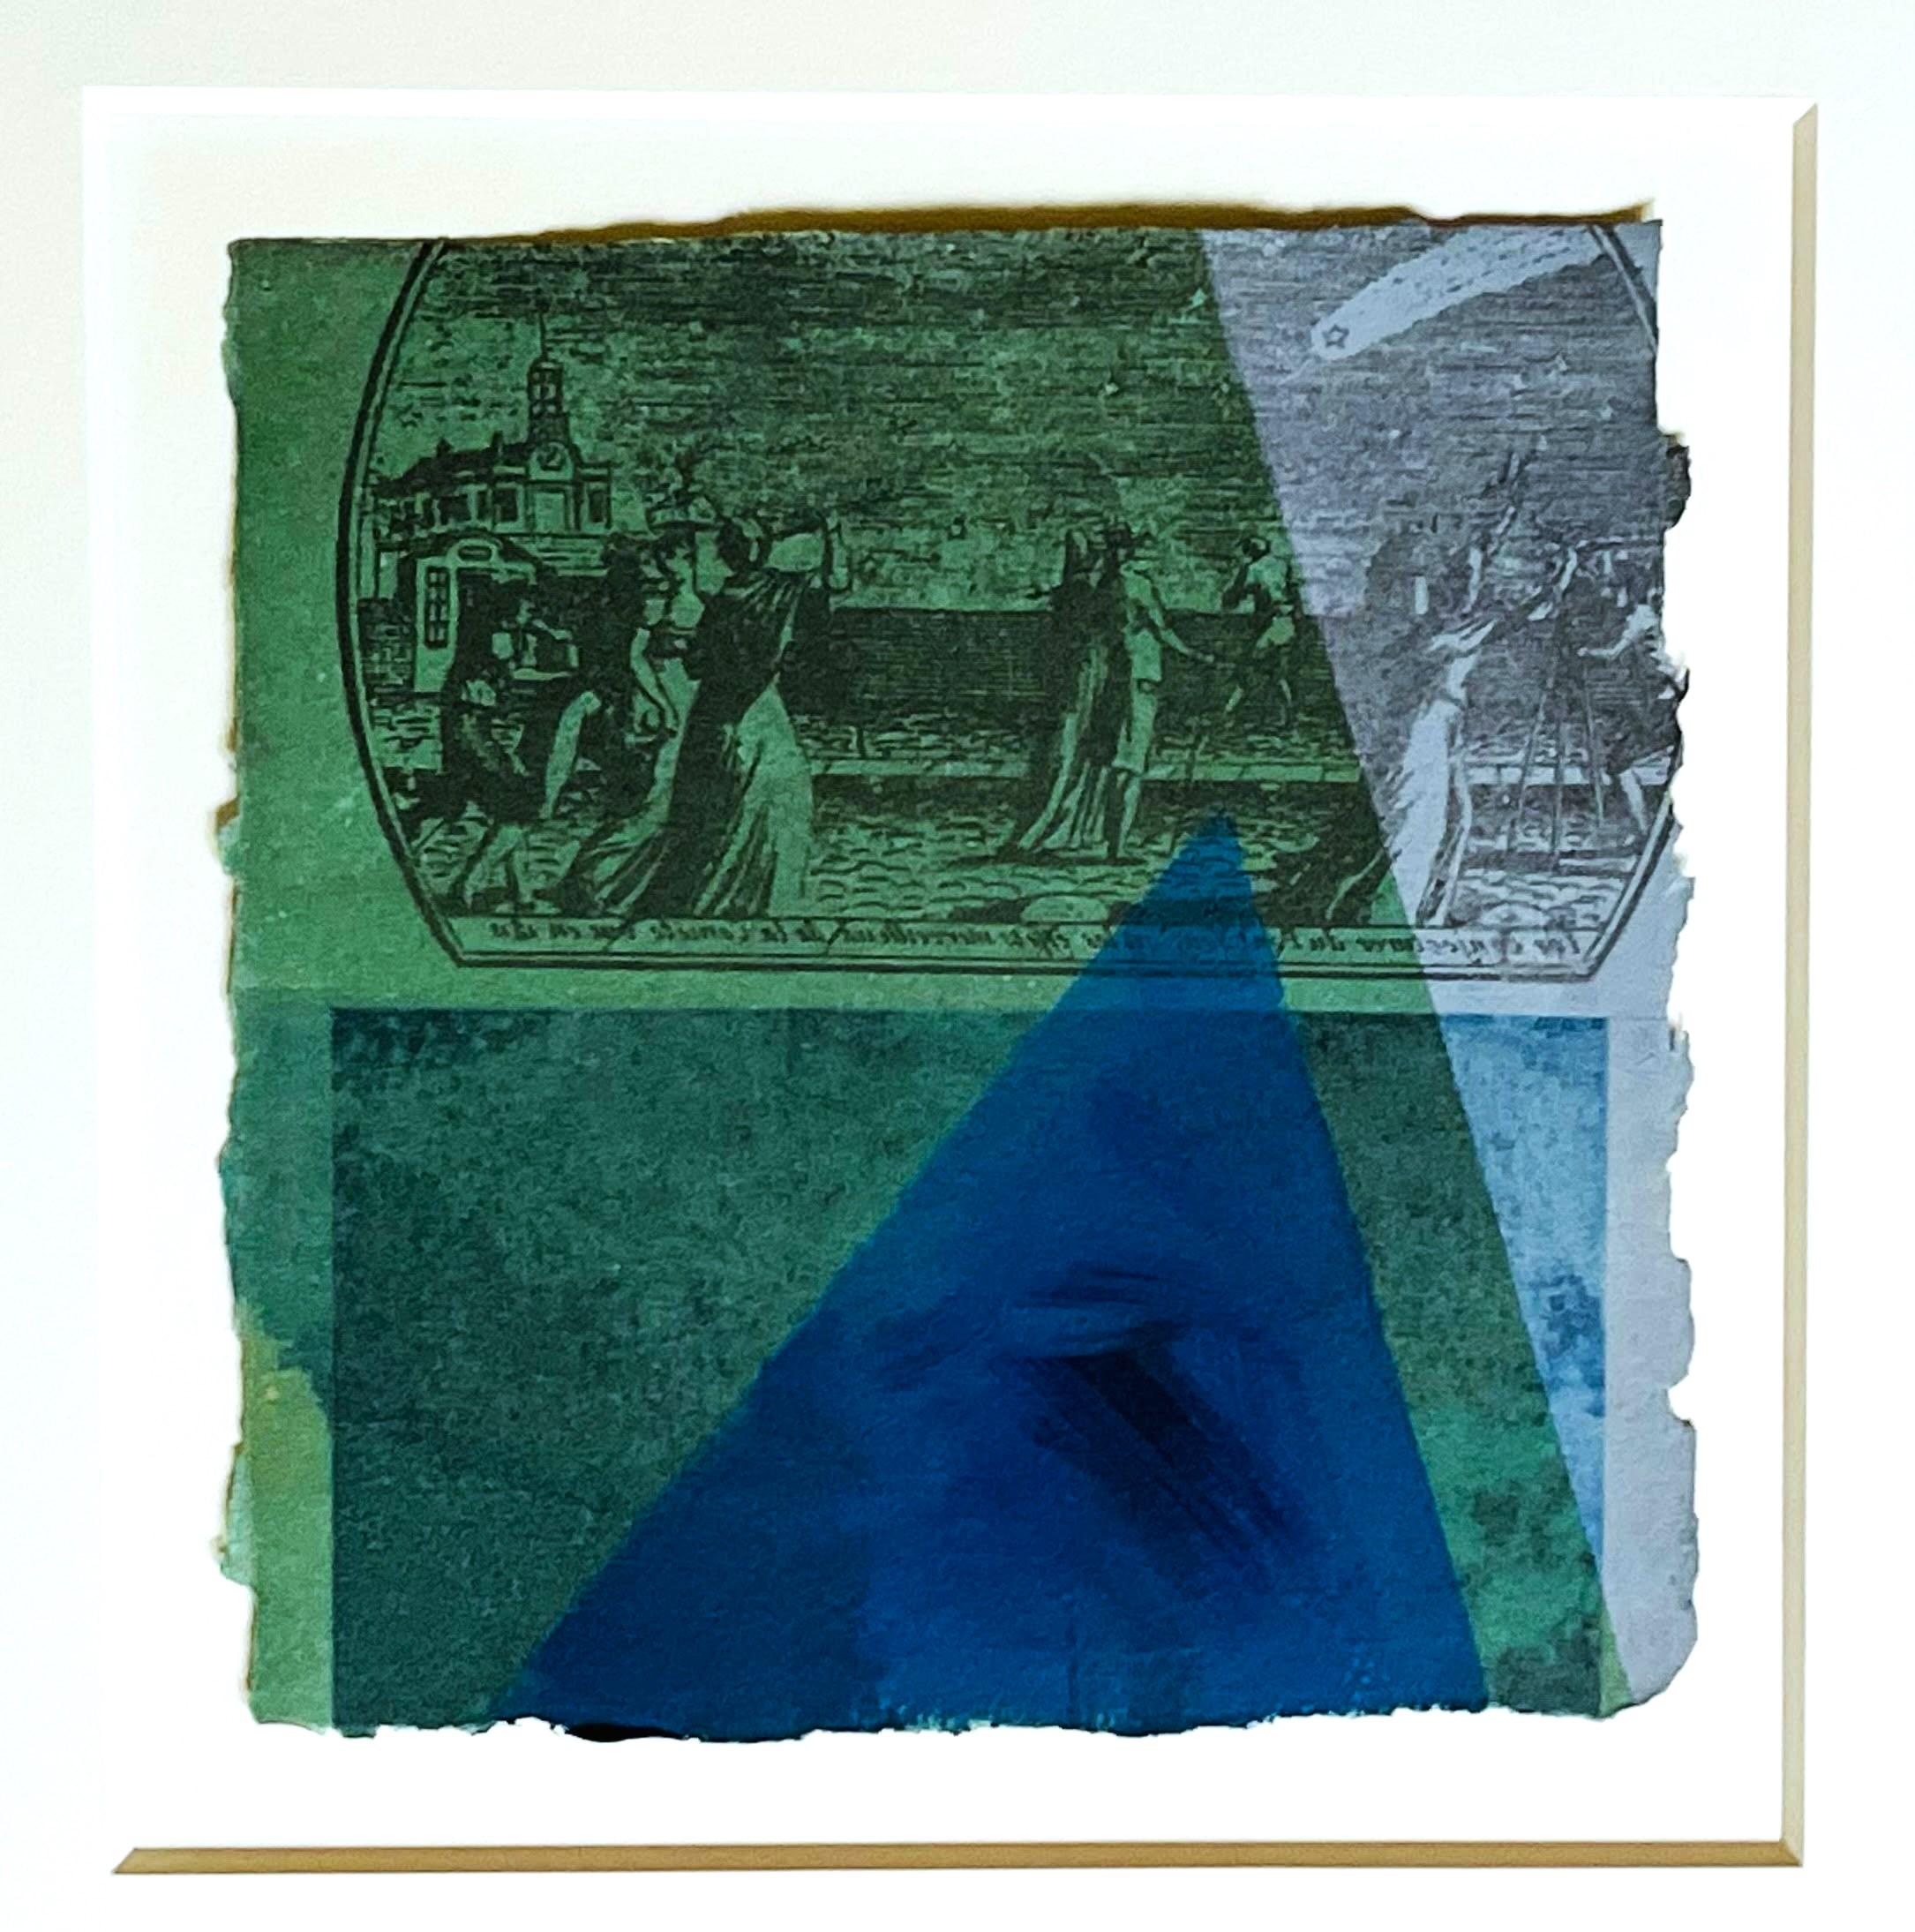 Measurements:
Mat:
18.5 x 17 inches
Artwork 
7.75 x 7.5 inches

Robert Rauschenberg
'Snowflake Crime XIX', from the ACE Gallery Collection, 1981
Solvent transfer, acrylic and fabric collage on handmade paper with deckled edges
Signed and dated '81